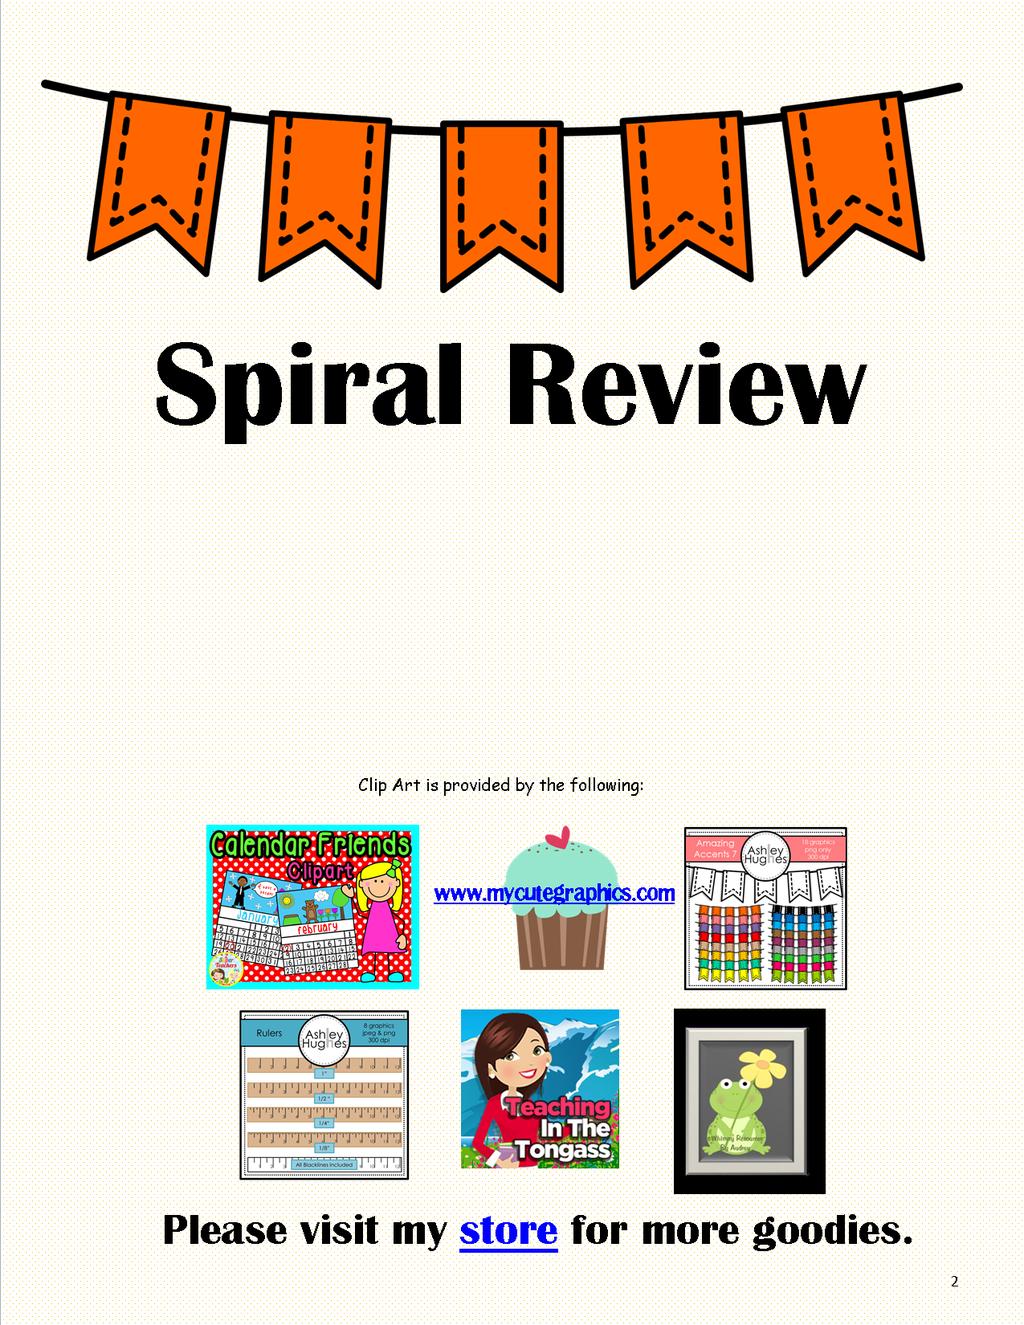 Enclosed is 9 weeks of Spiral Review that